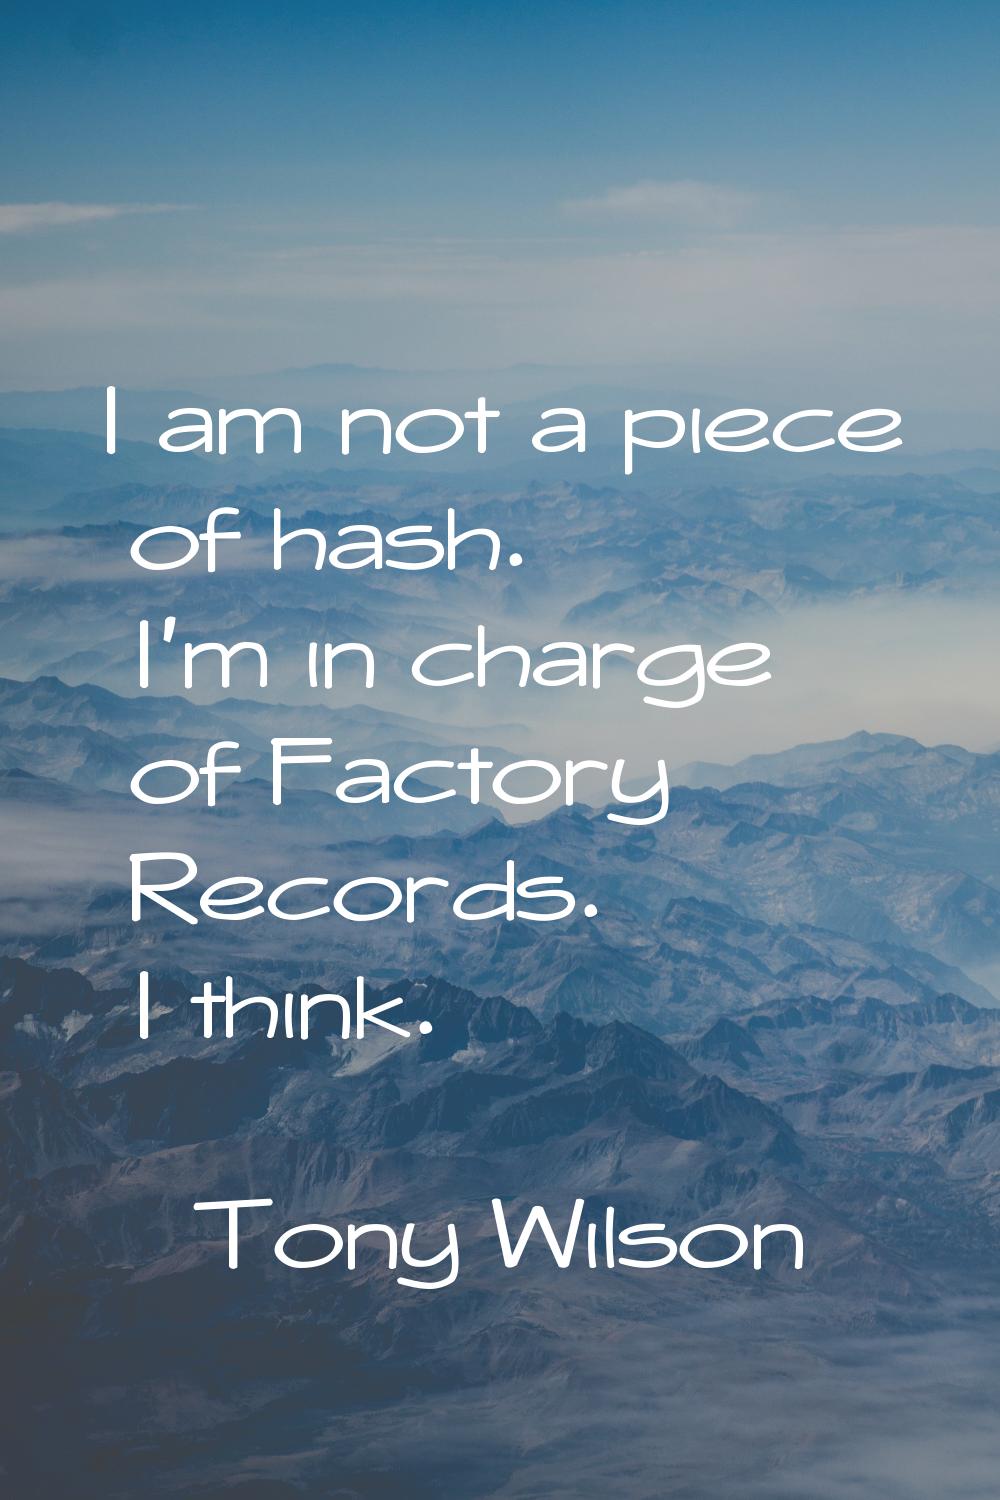 I am not a piece of hash. I'm in charge of Factory Records. I think.